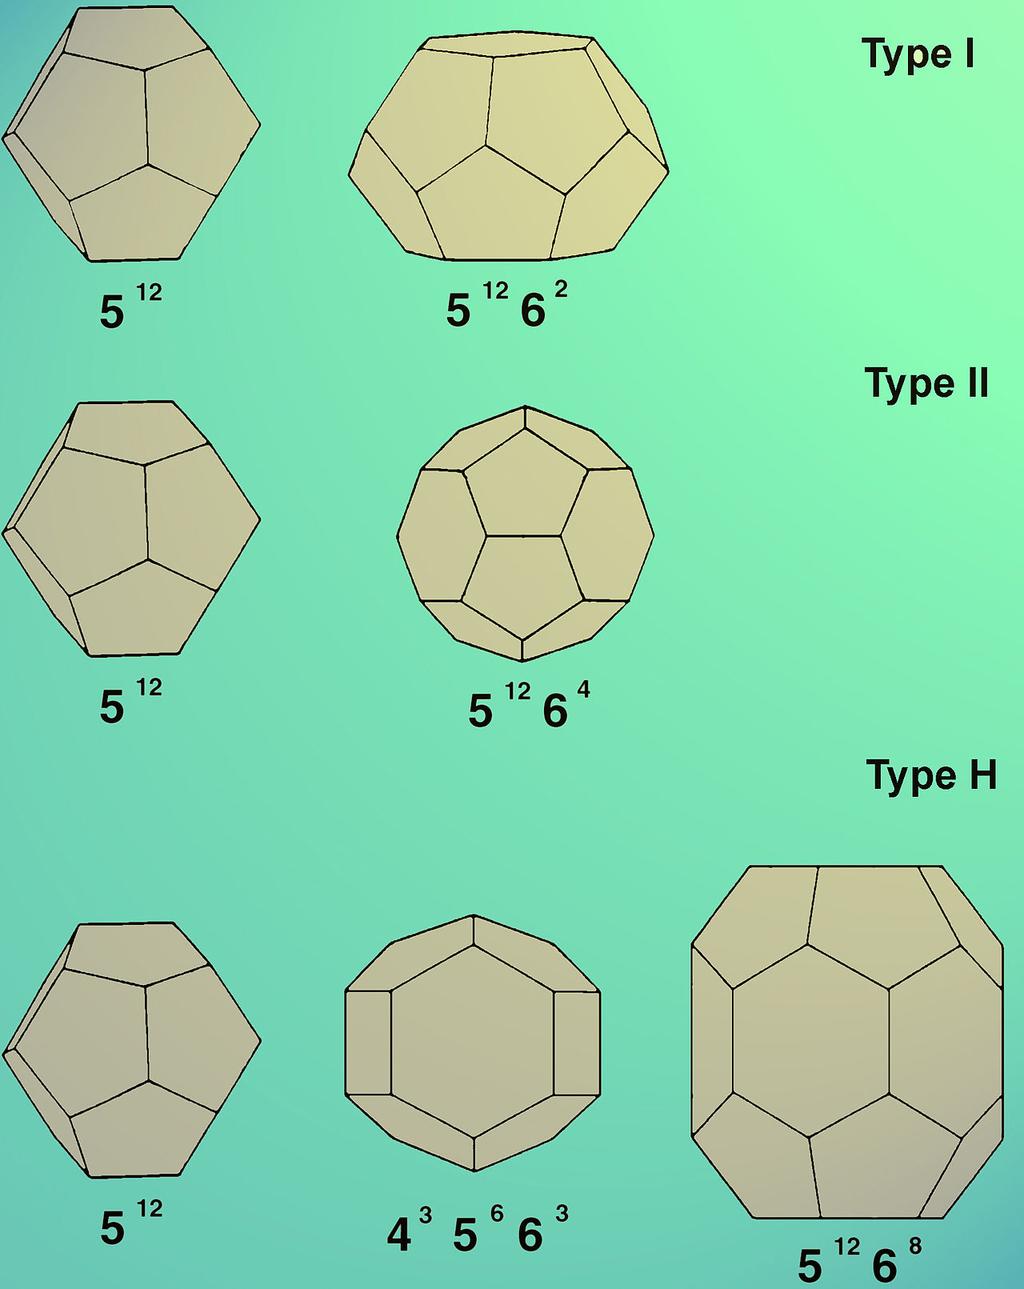 Solvation of nonpolar molecules Clathrates have different but well-defined structures Gas hydrates usually form two crystallographic cubic structures (types I and II) and seldom, a third hexagonal